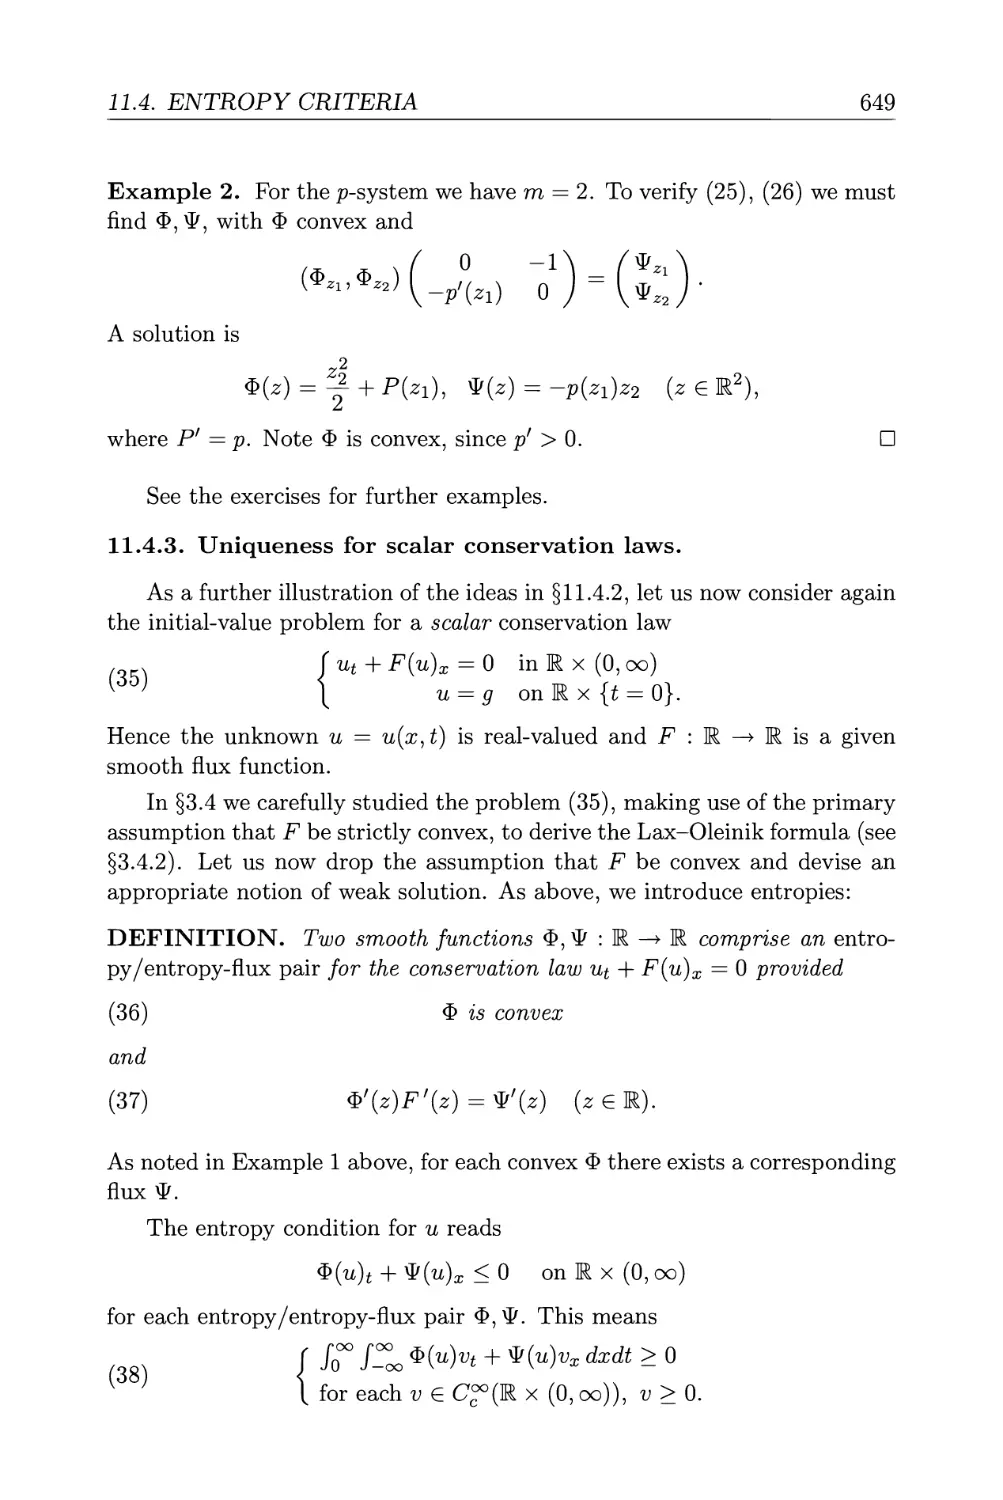 11.4.3. Uniqueness for scalar conservation laws